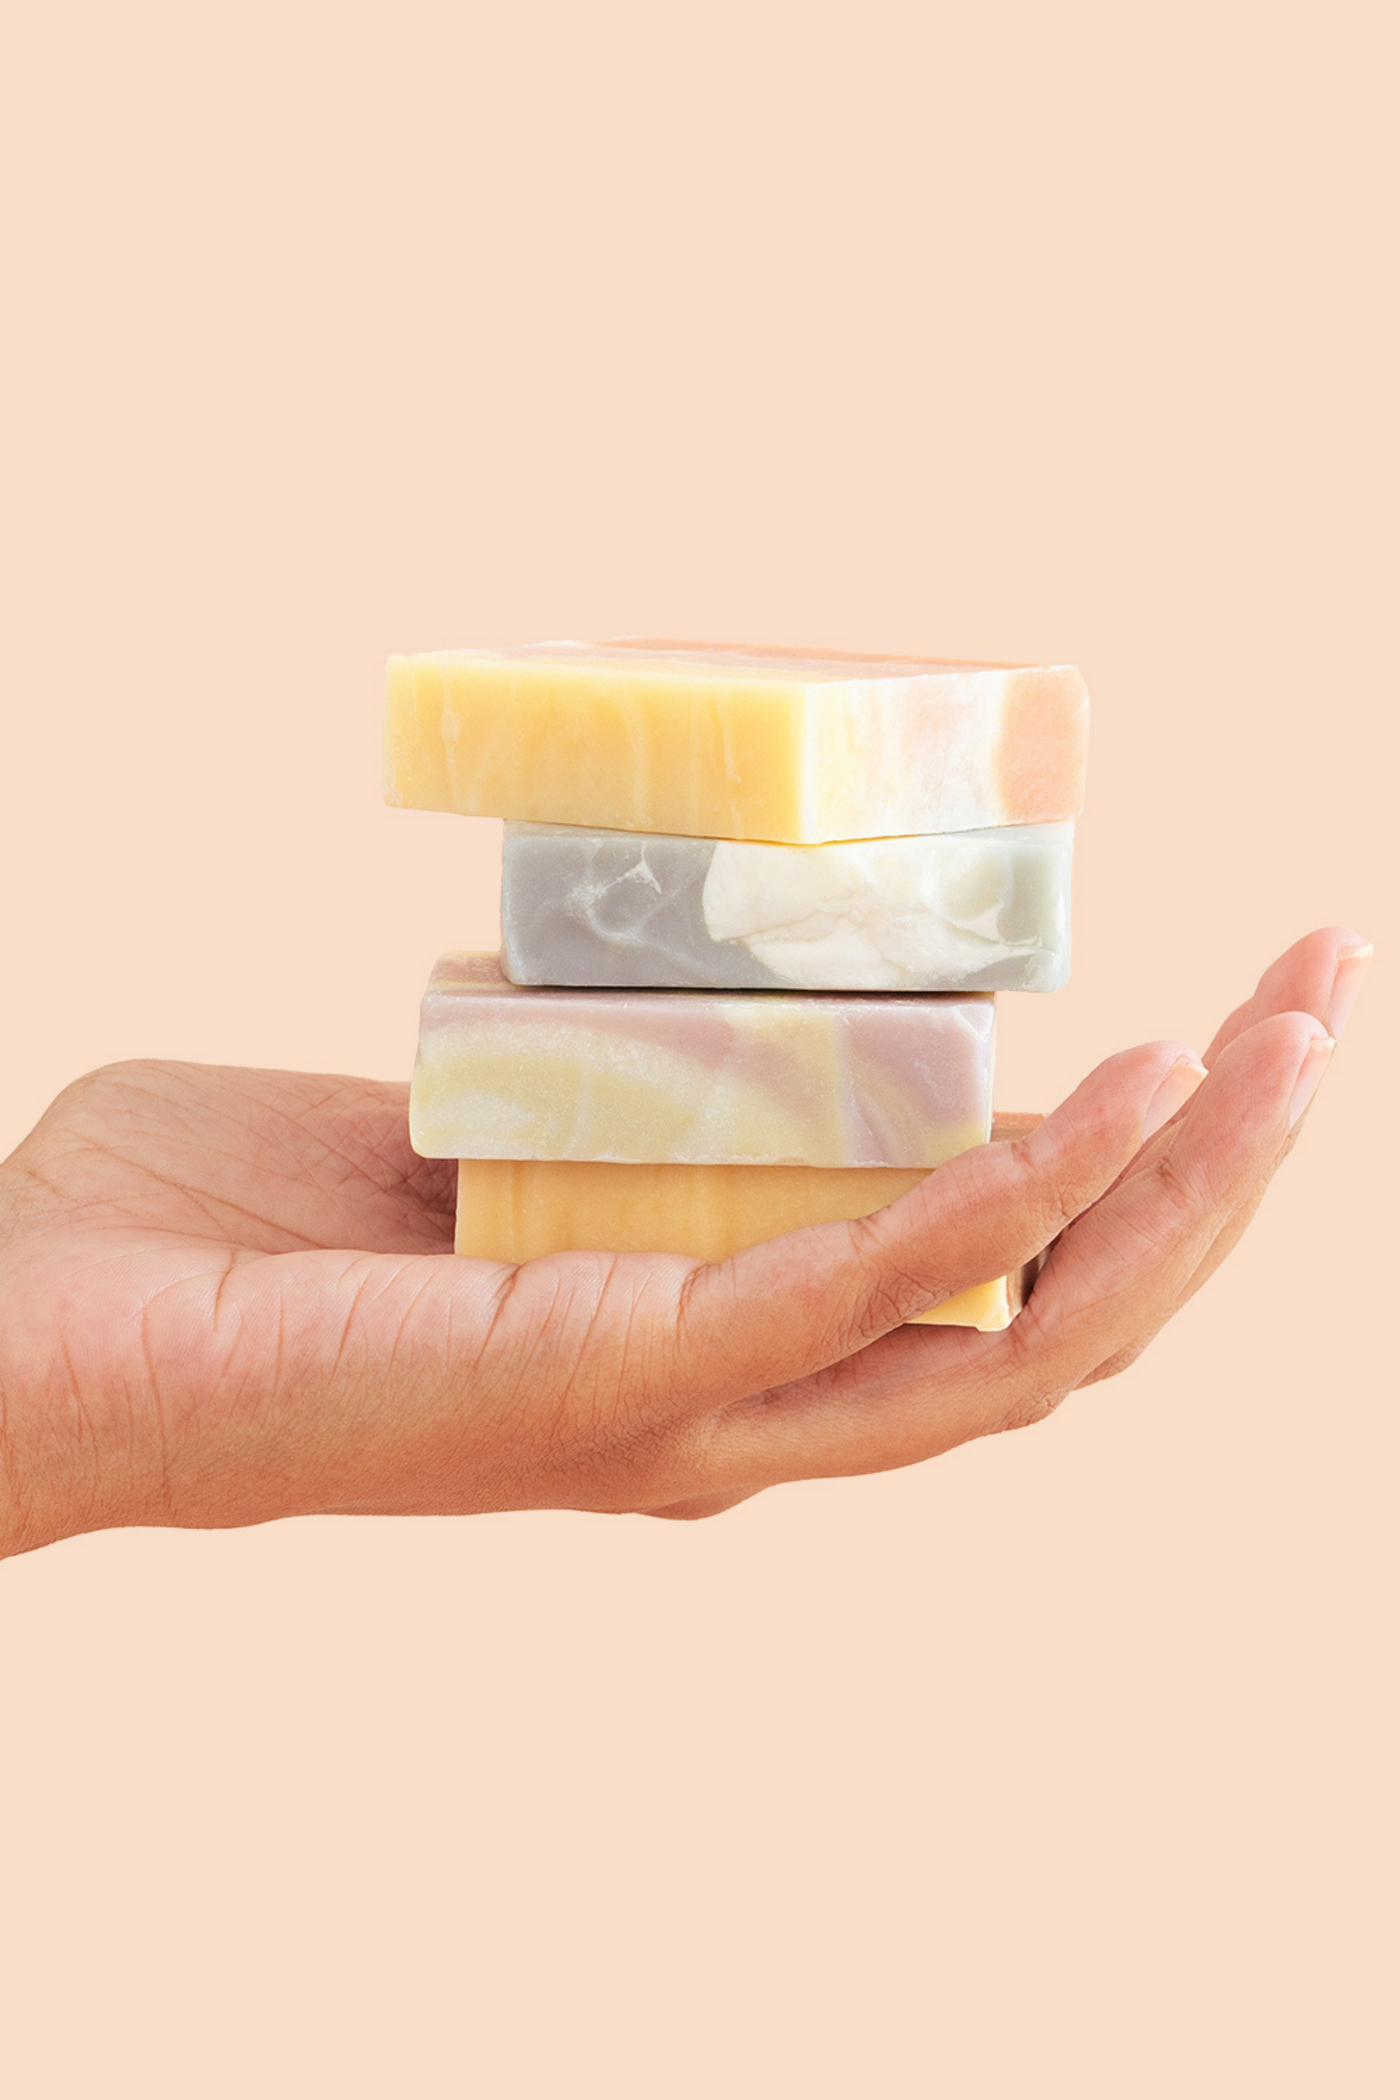 Gentle Mood Serene Mood Bar, available on ZERRIN with free Singapore shipping